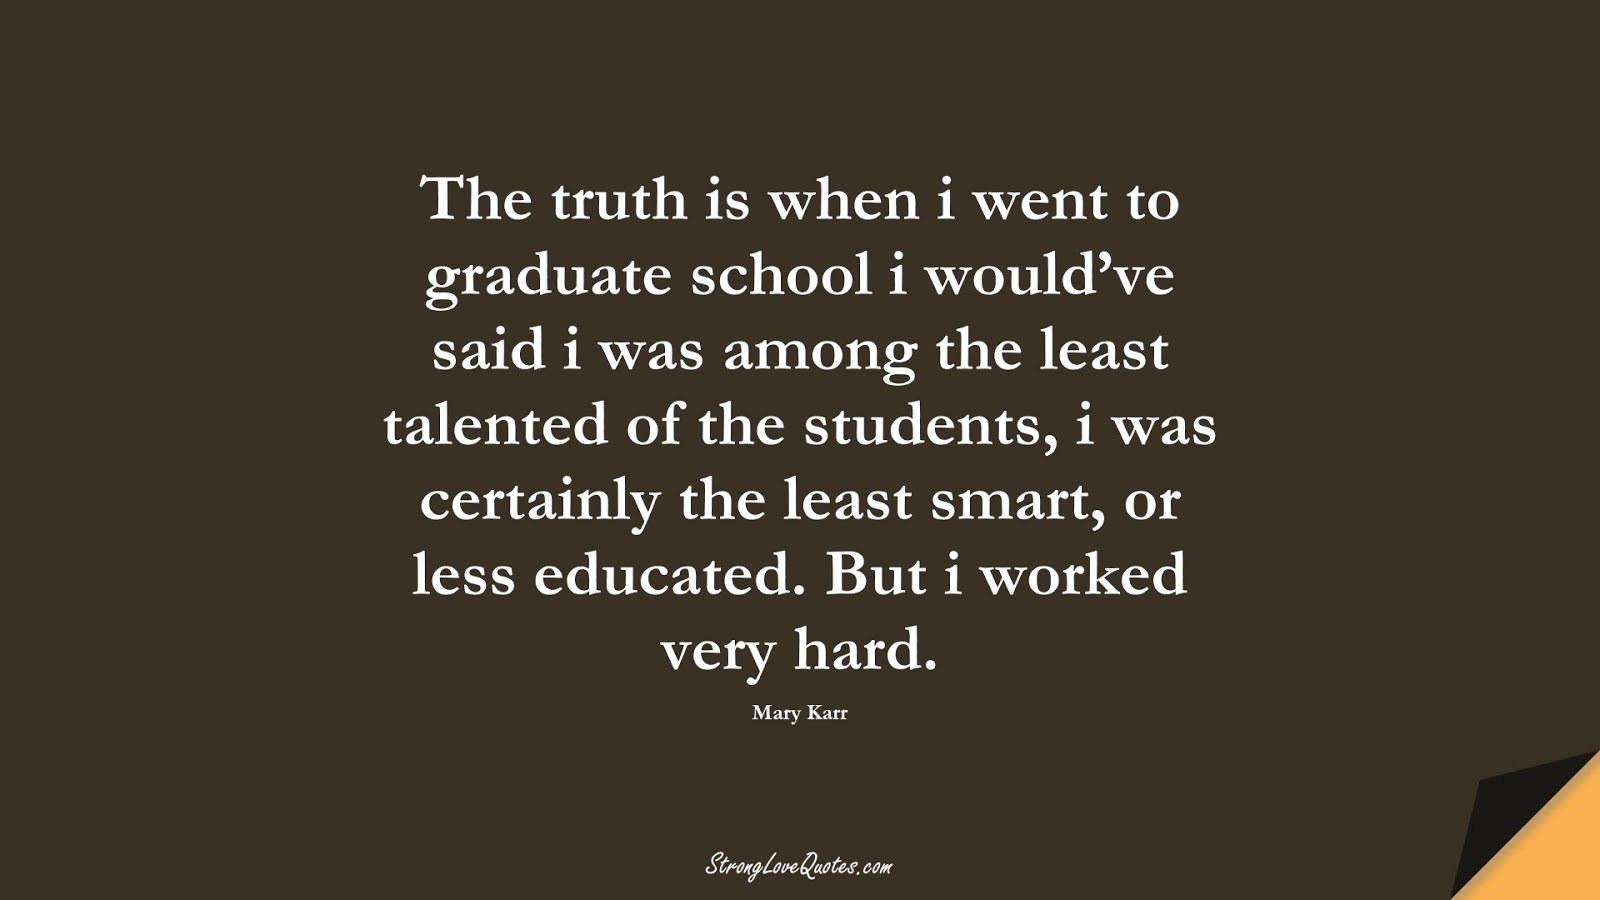 The truth is when i went to graduate school i would’ve said i was among the least talented of the students, i was certainly the least smart, or less educated. But i worked very hard. (Mary Karr);  #EducationQuotes